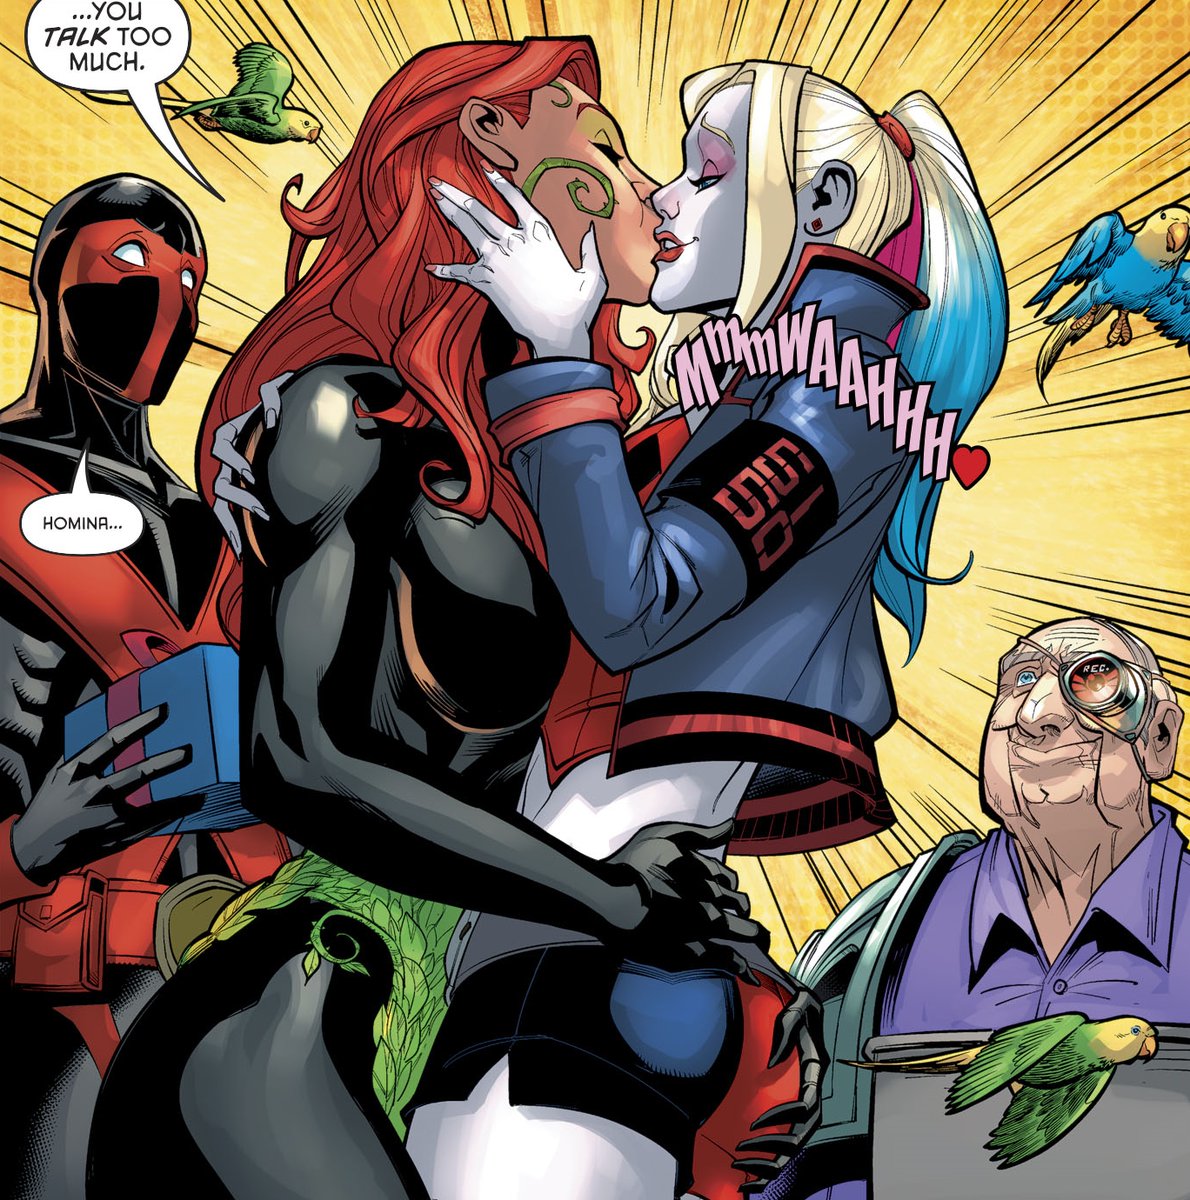 Anime Lesbian Porn Poison Ivy - Drawn to Comics: Harley Quinn and Poison Ivy Finally Have Their First  In-Canon, Main-Universe Kiss! | Autostraddle